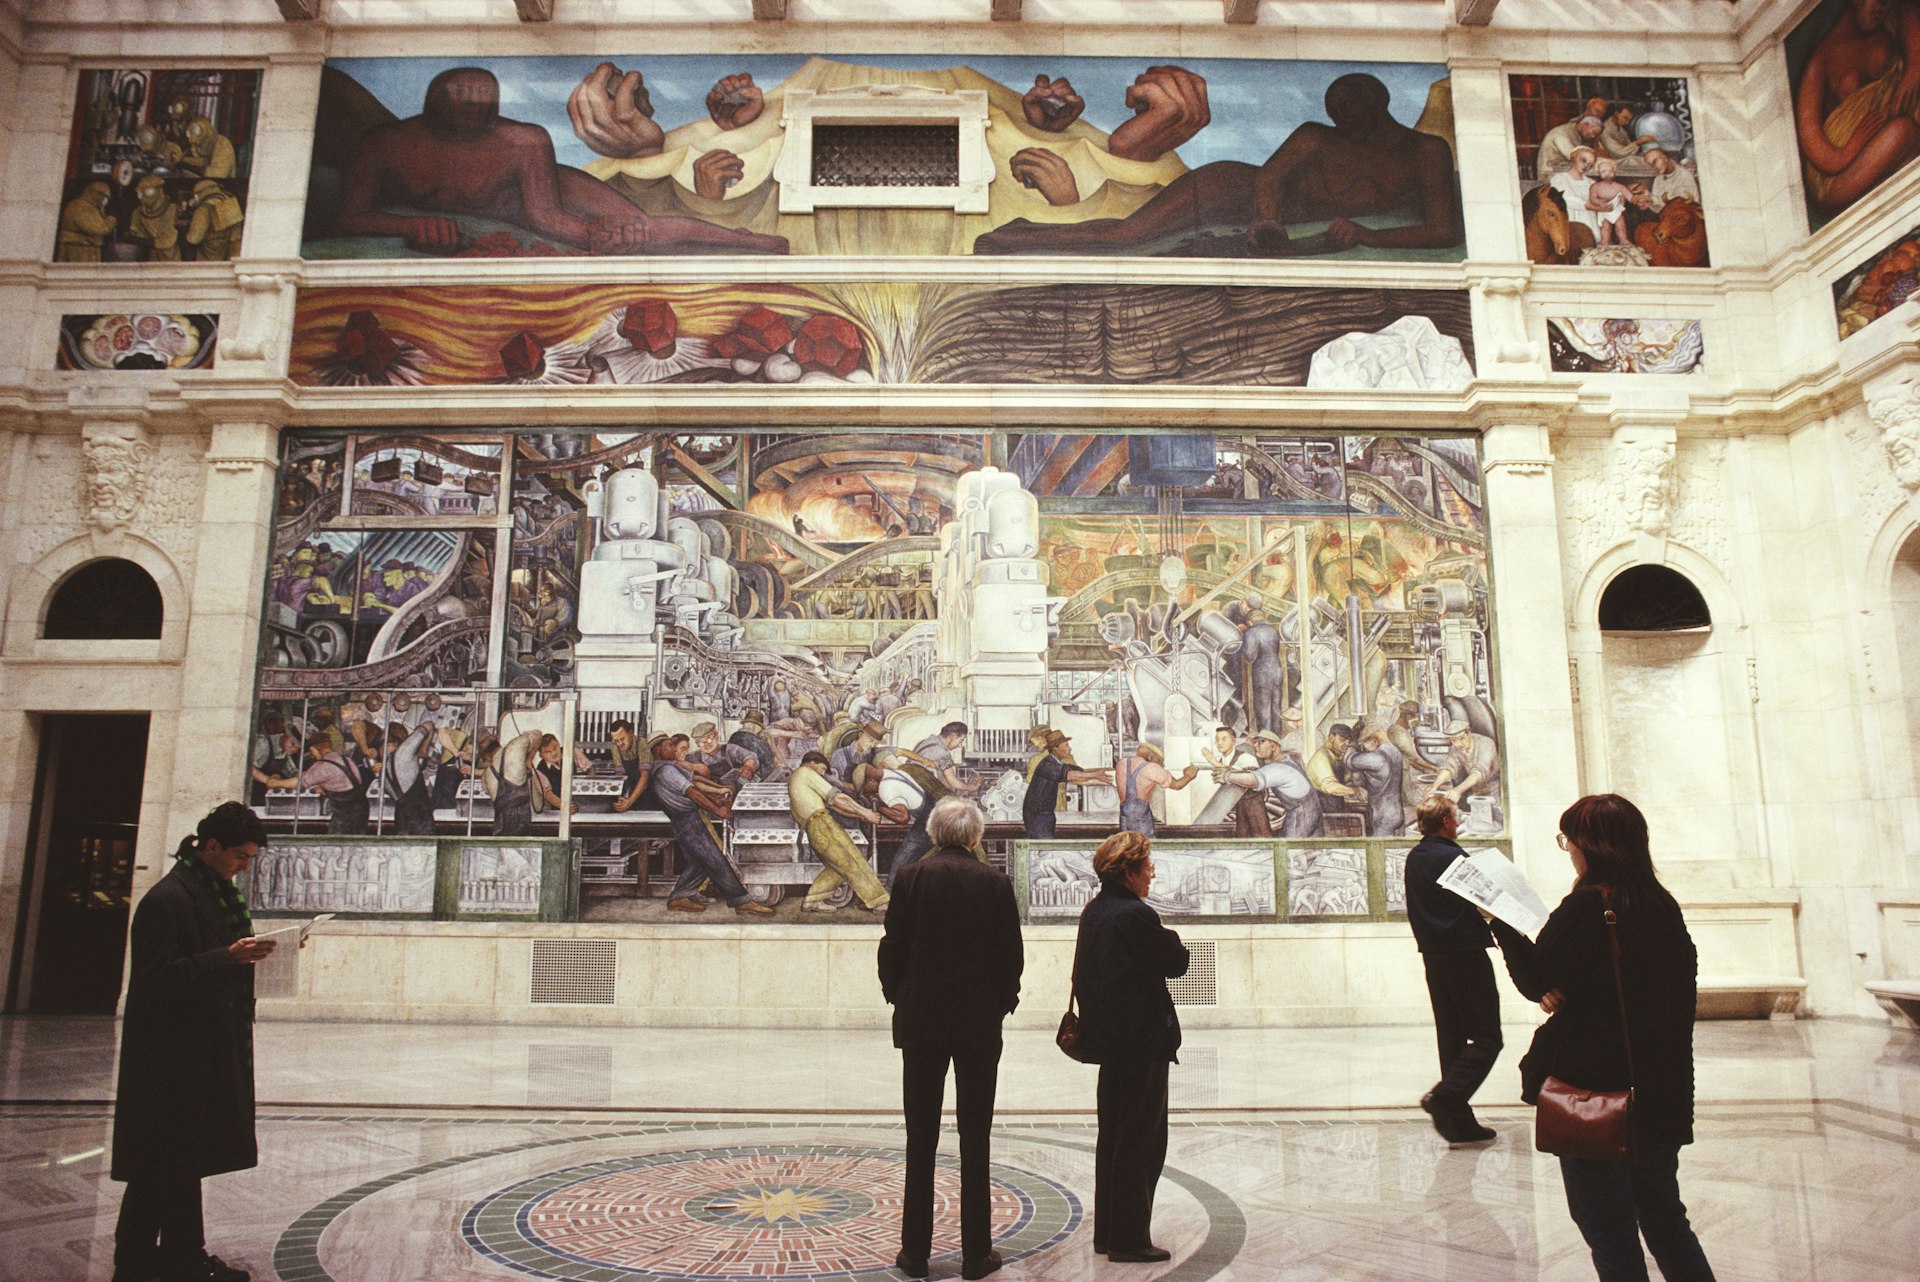 The Detroit Industry Murals, a series of frescoes by Mexican artist Diego Rivera at the Detroit Institute of Arts